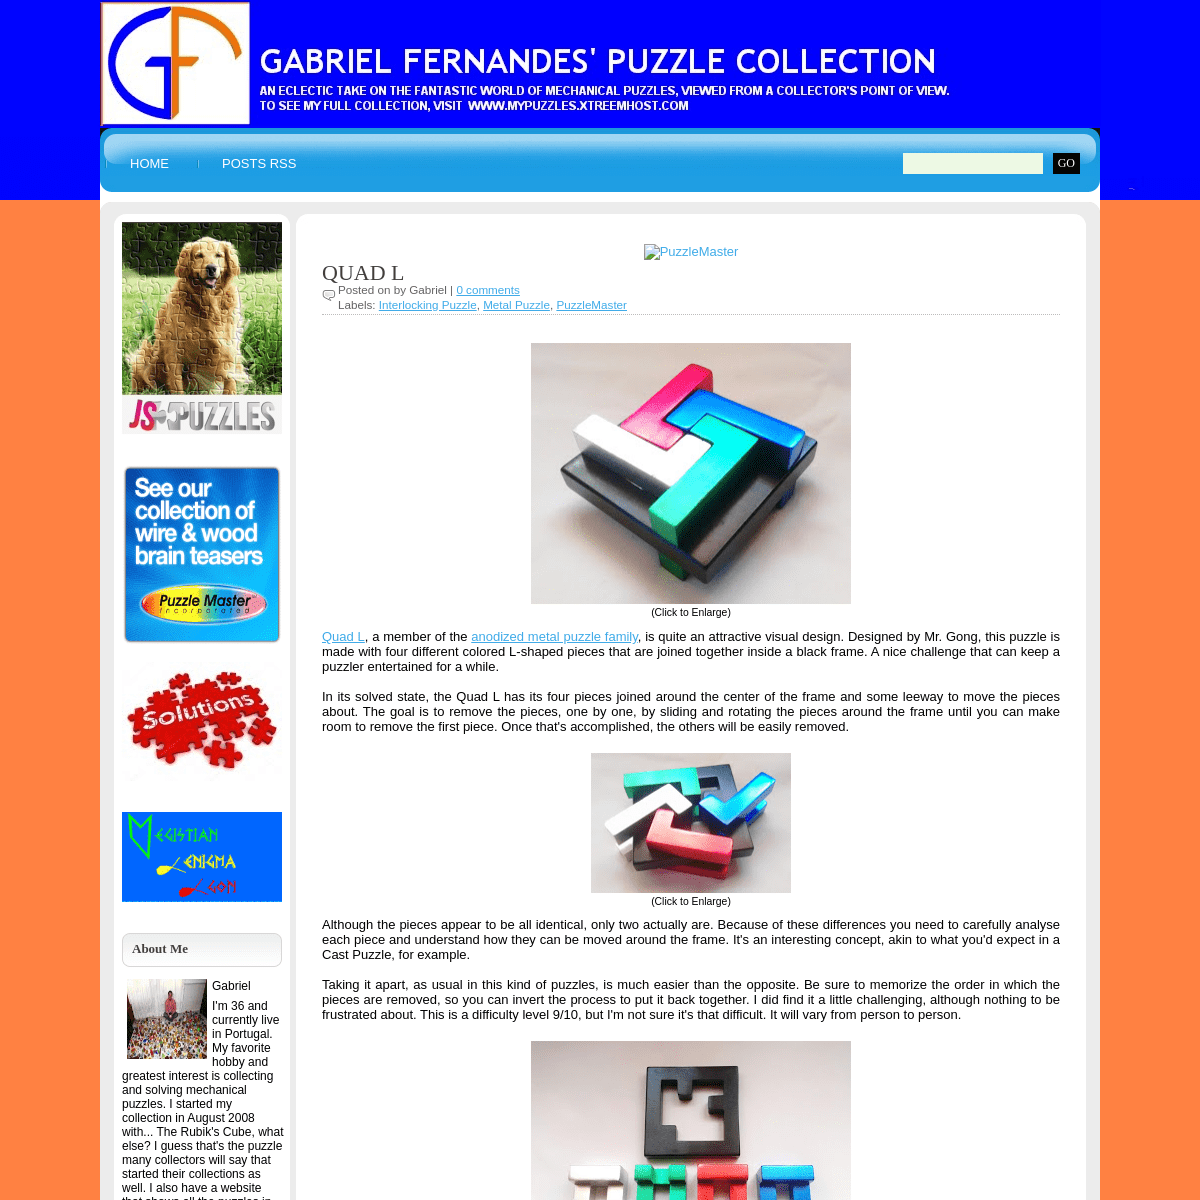 A complete backup of mypuzzlecollection.blogspot.com